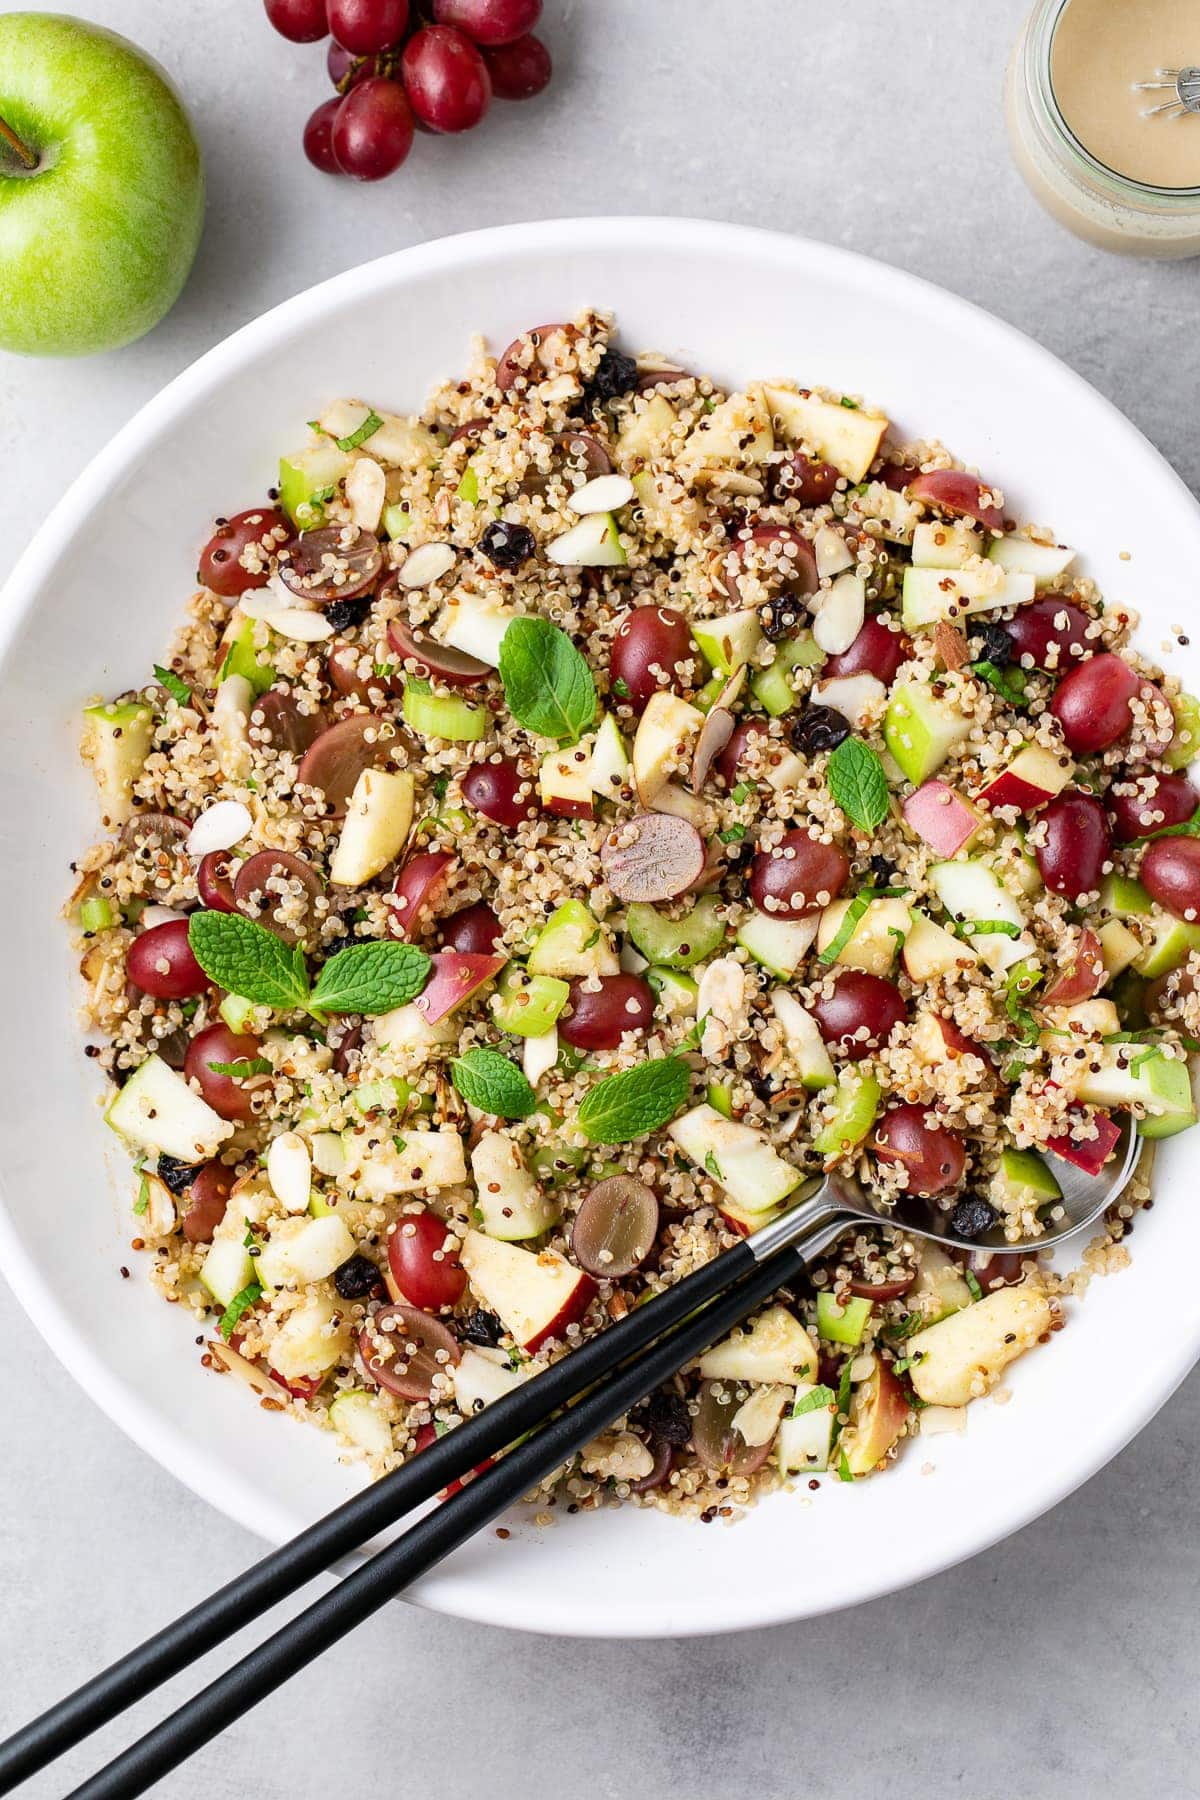 top down view of healthy vegan apple quinoa salad recipe with grapes, mint and sweet tahini dressing in a serving bowl.